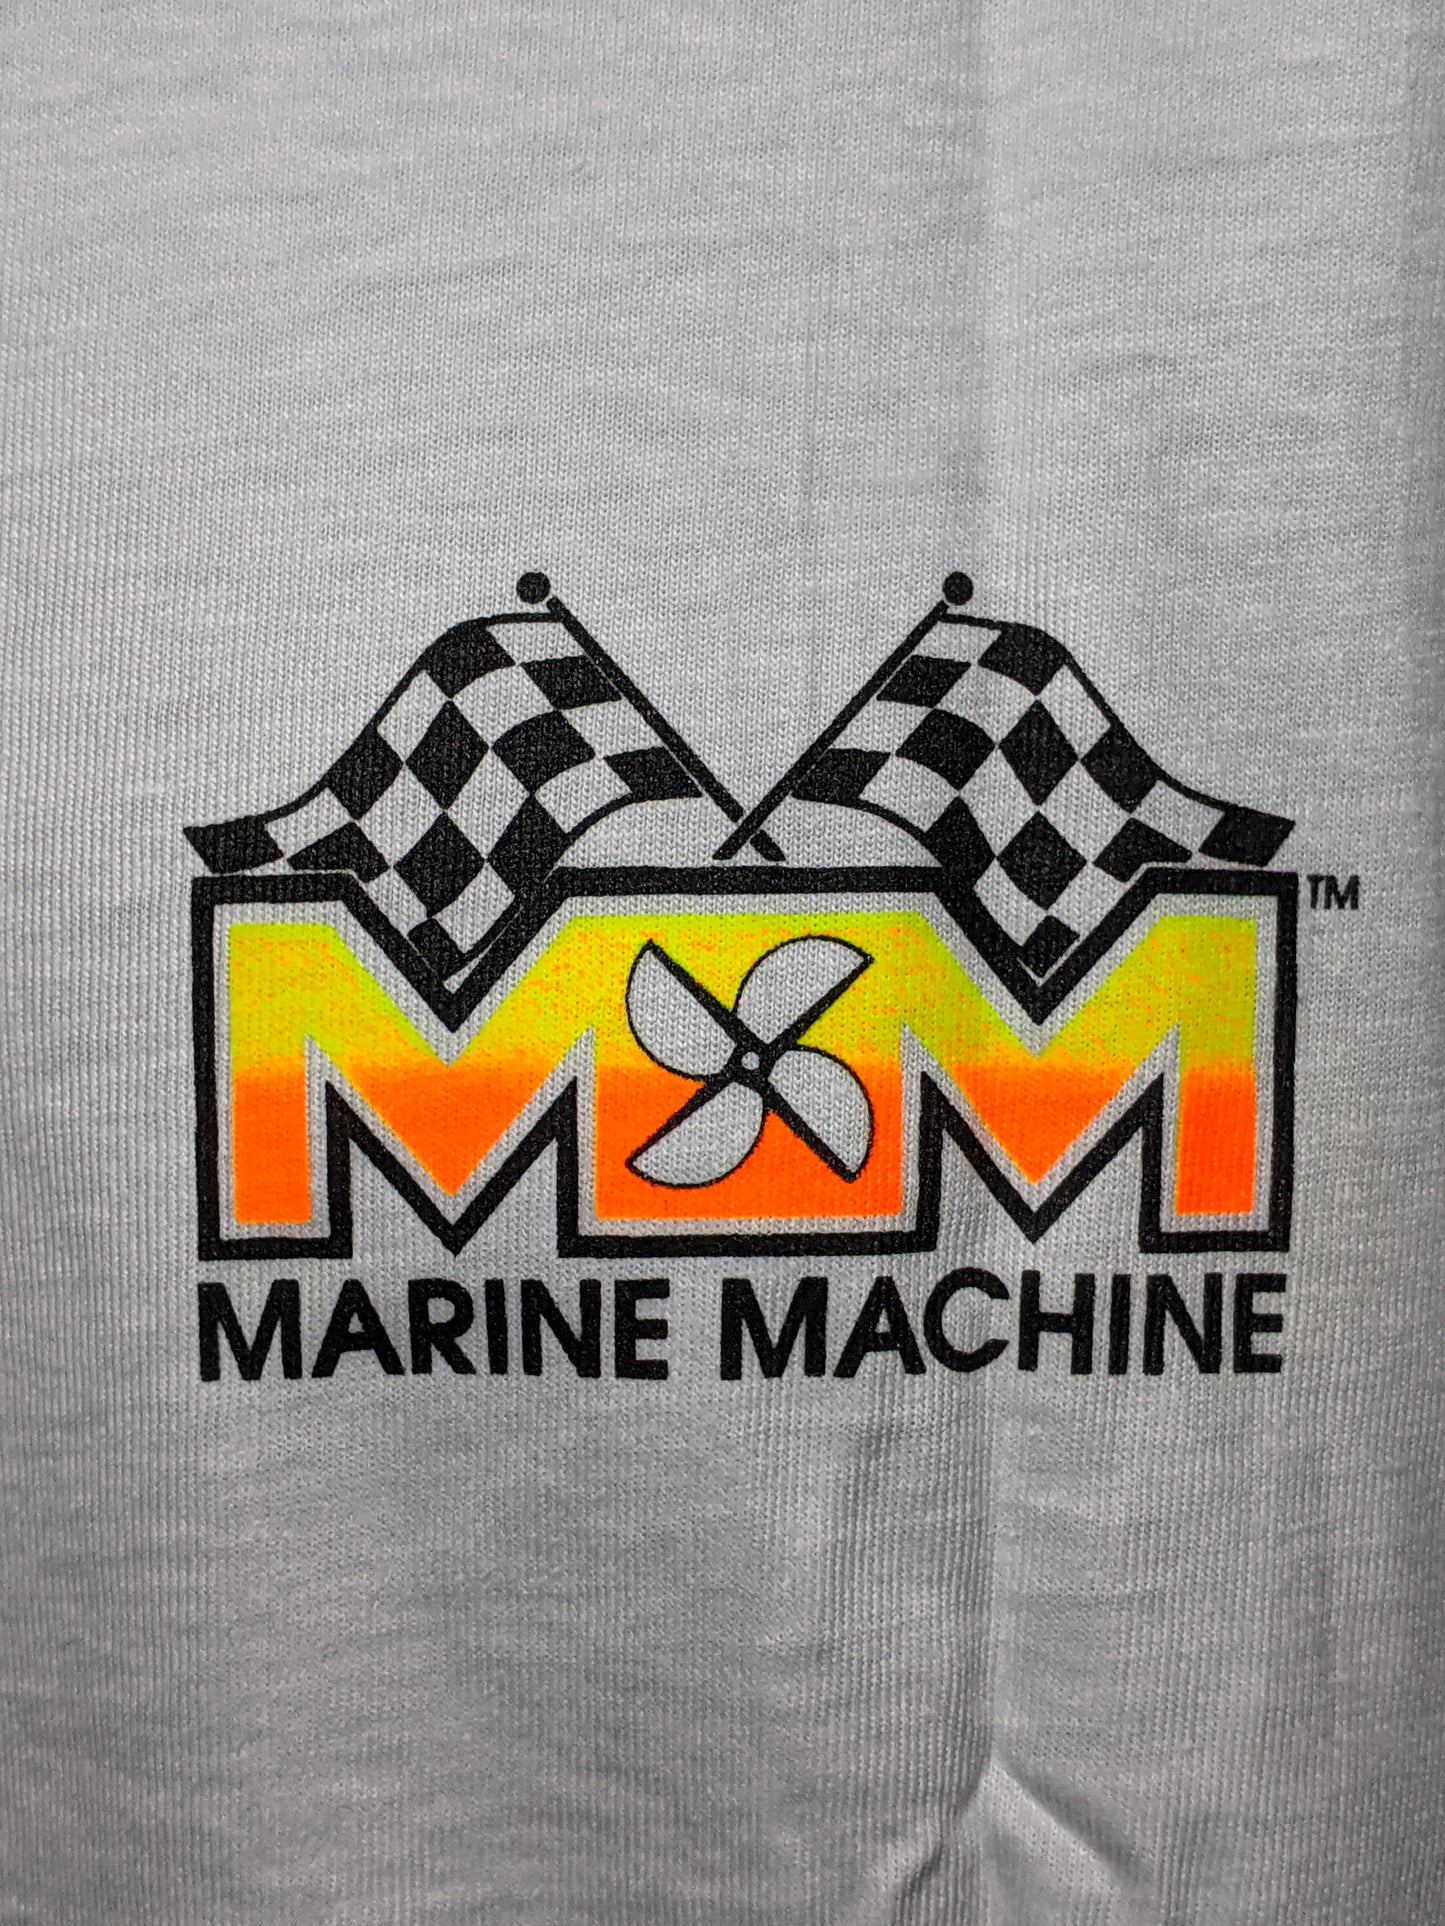 " Makin Waves "  Offshore Powerboat Beefy-T Shirt